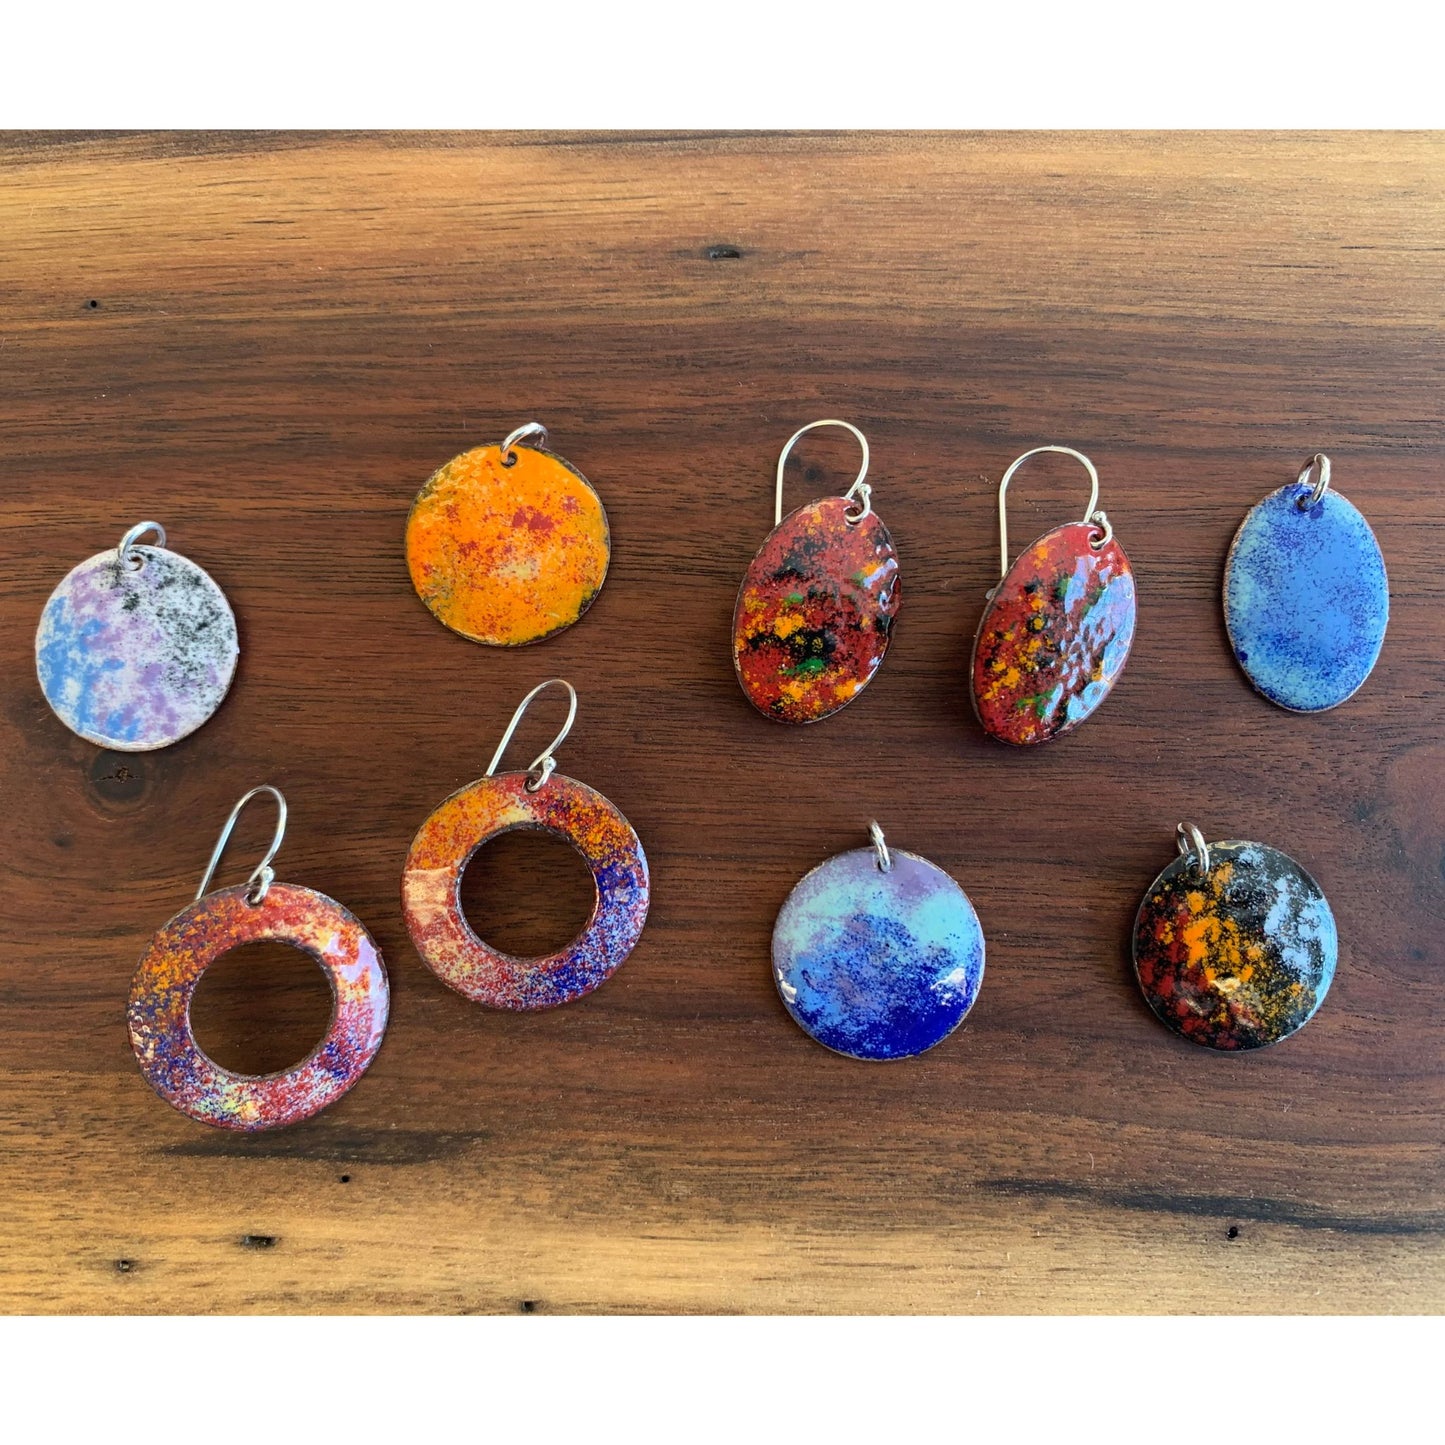 Art Night Out: Torch Fired Enameling - May 3 - Materials Fee Included!